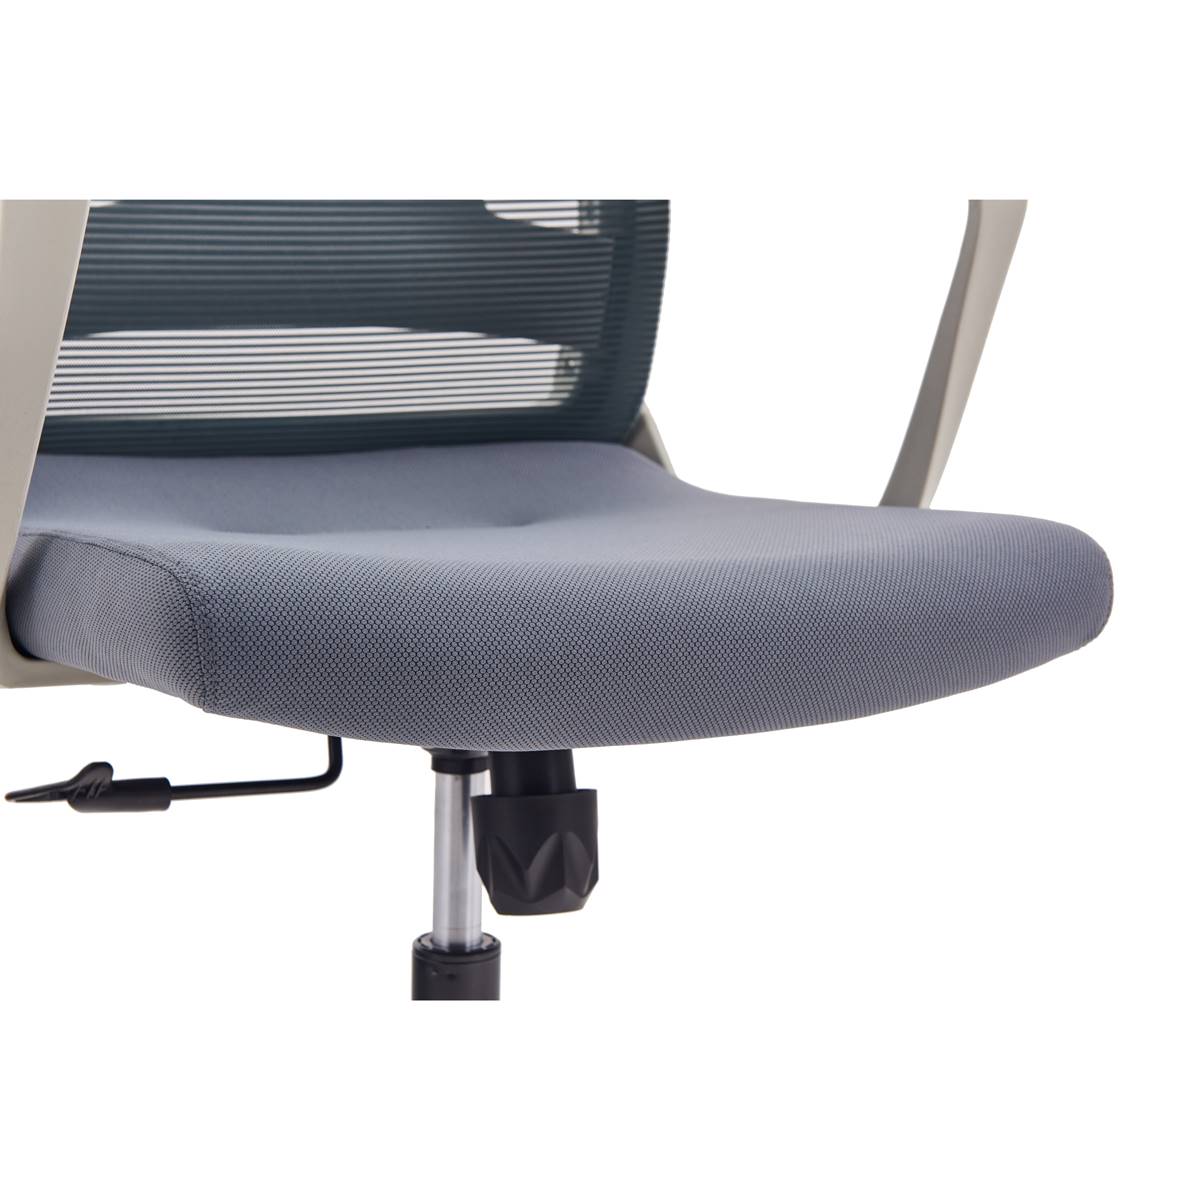 FM FURNITURE Adelaide Office Chair